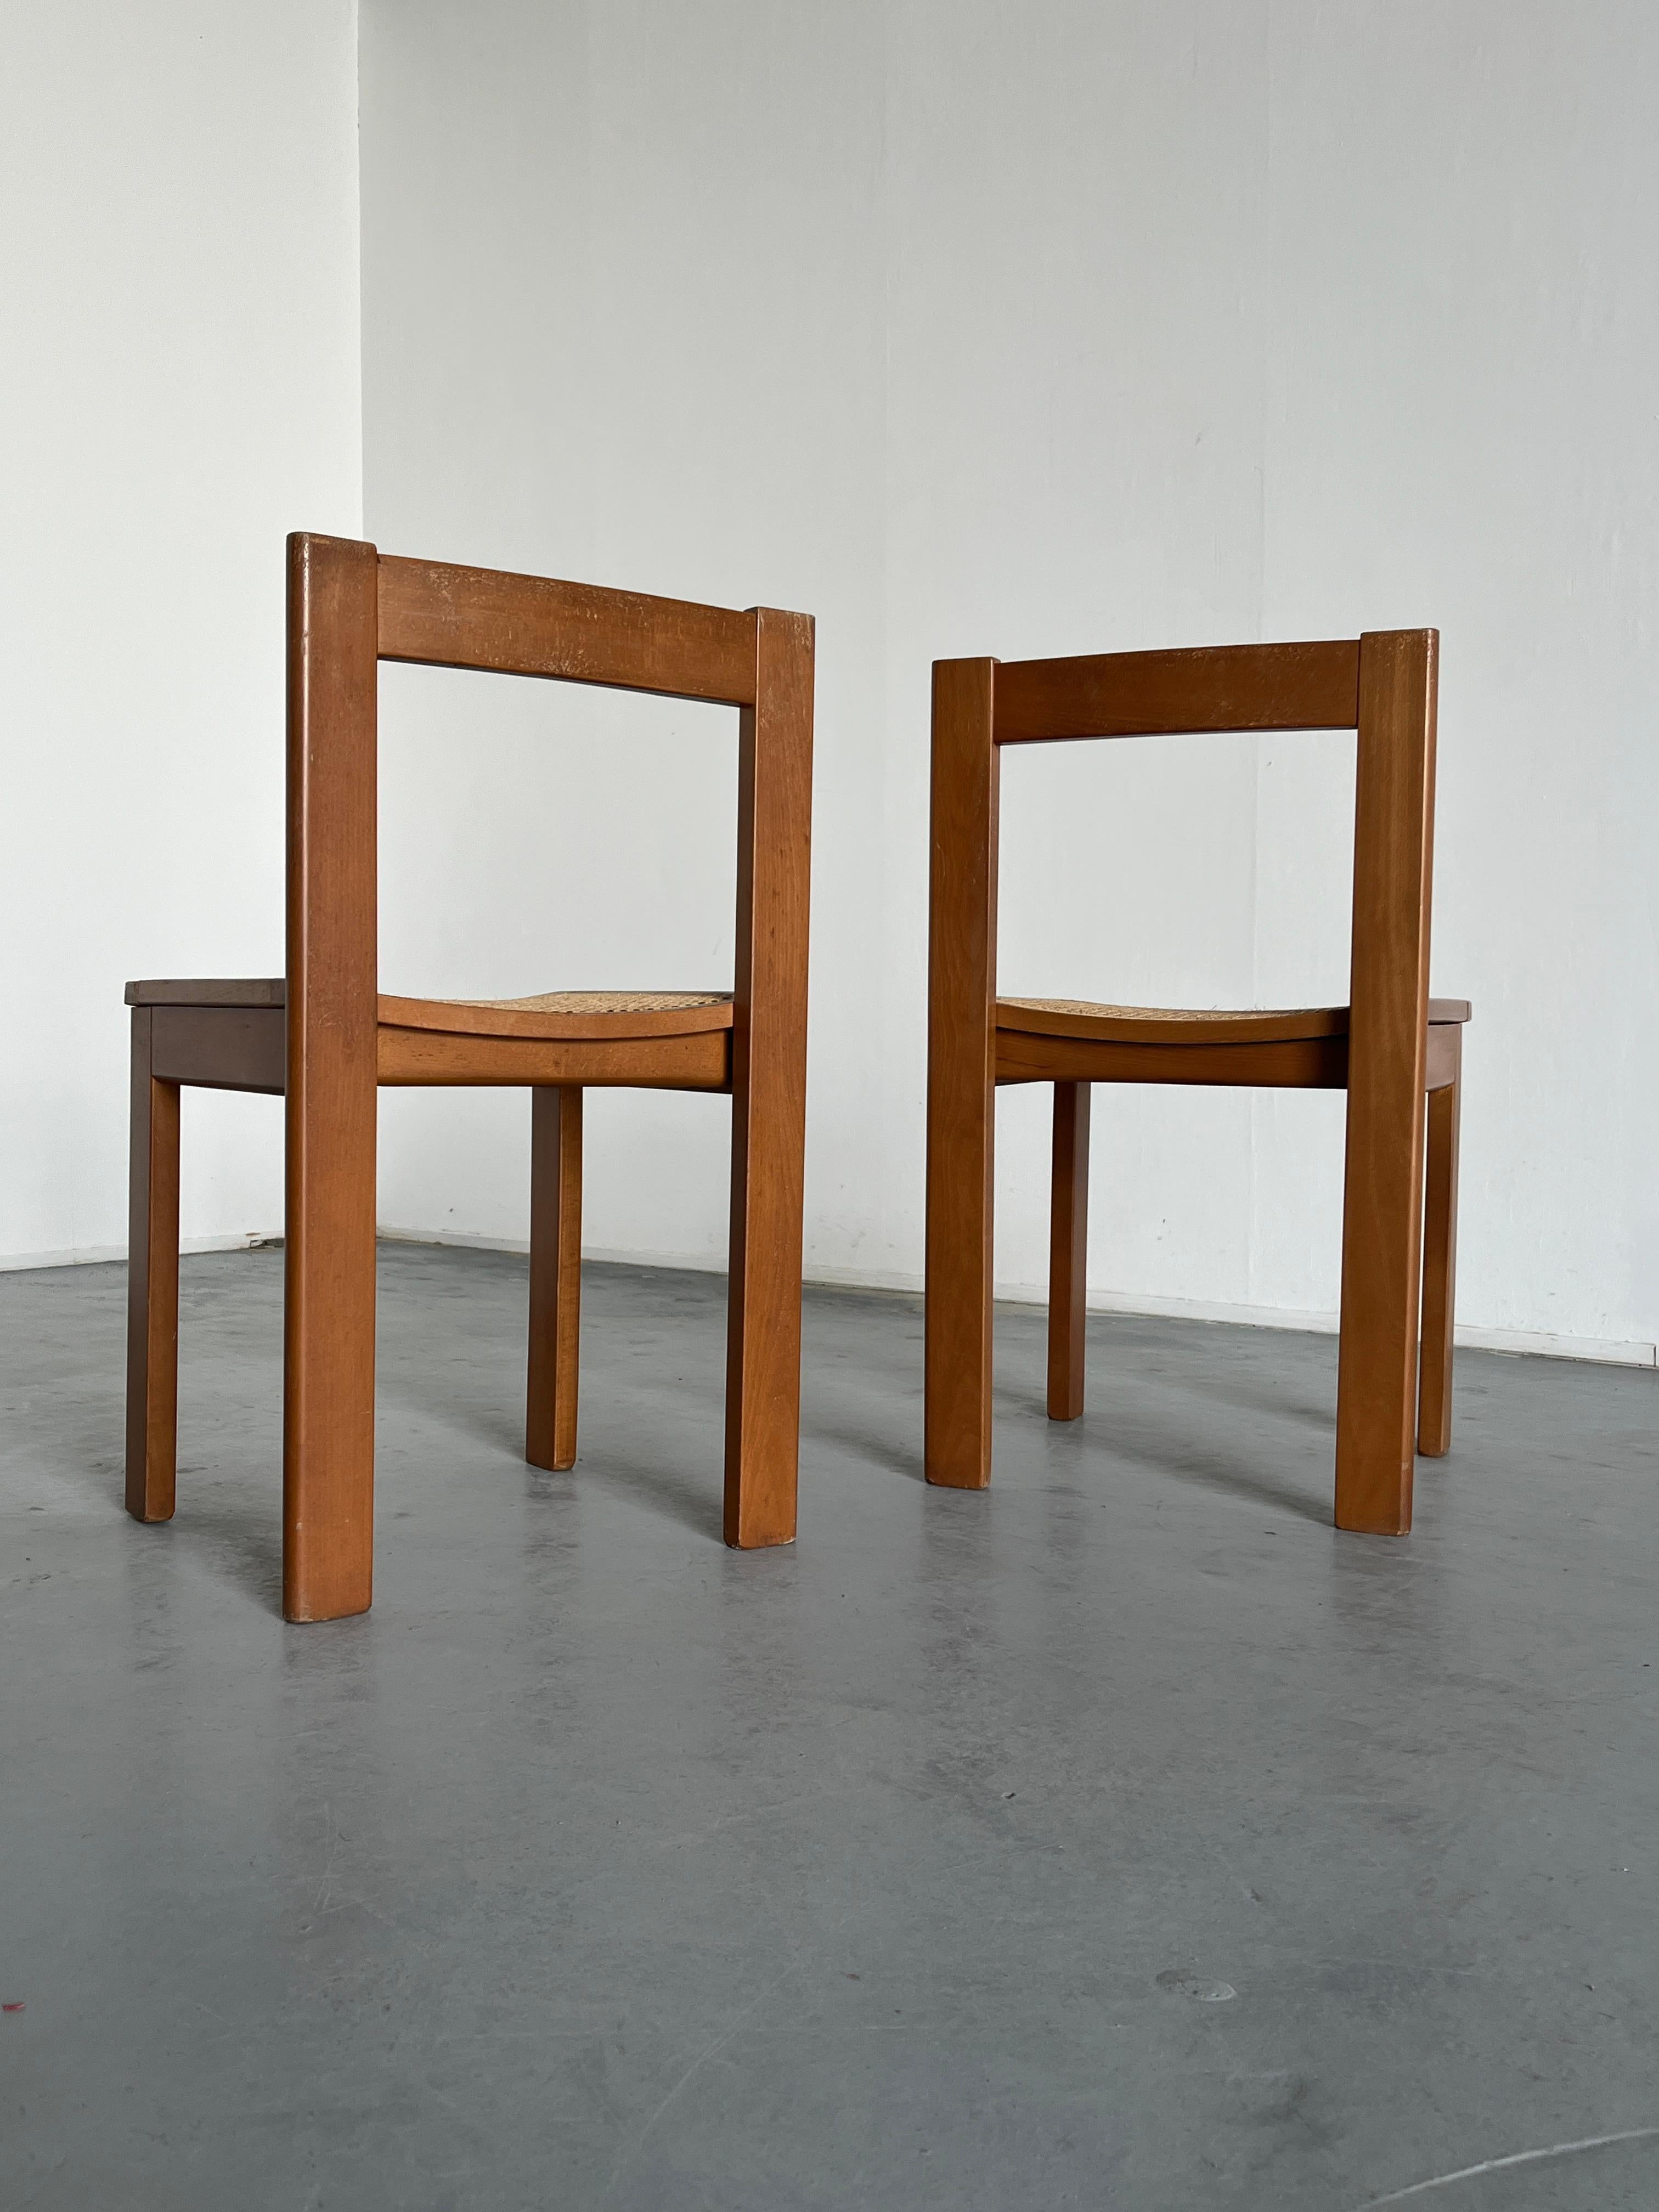 Set of 4 Vintage Mid-Century Modern Constructivist Wooden Dining Chairs, 1960s For Sale 1